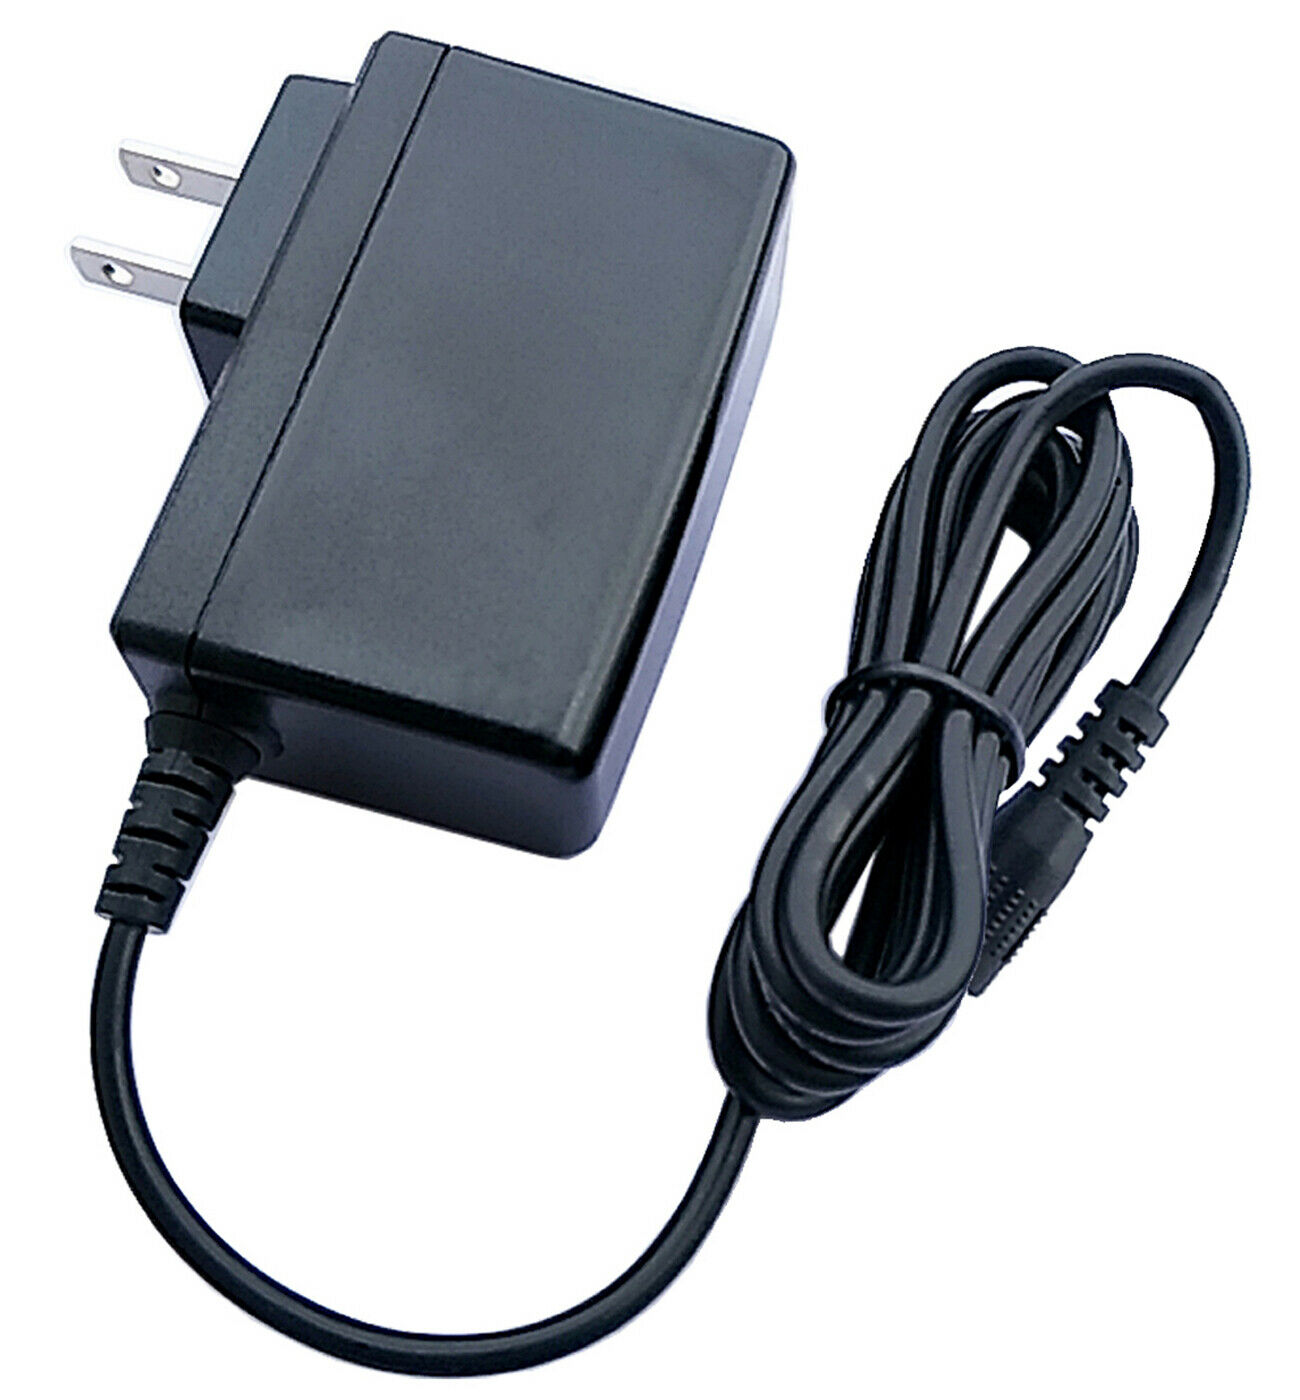 60W AC Adapter Power Supply for Tascam DP-01FX, DP-02, DP-02CF, DP-03 Compatible P/N: PS-1225L Type: AC Adapter Pow